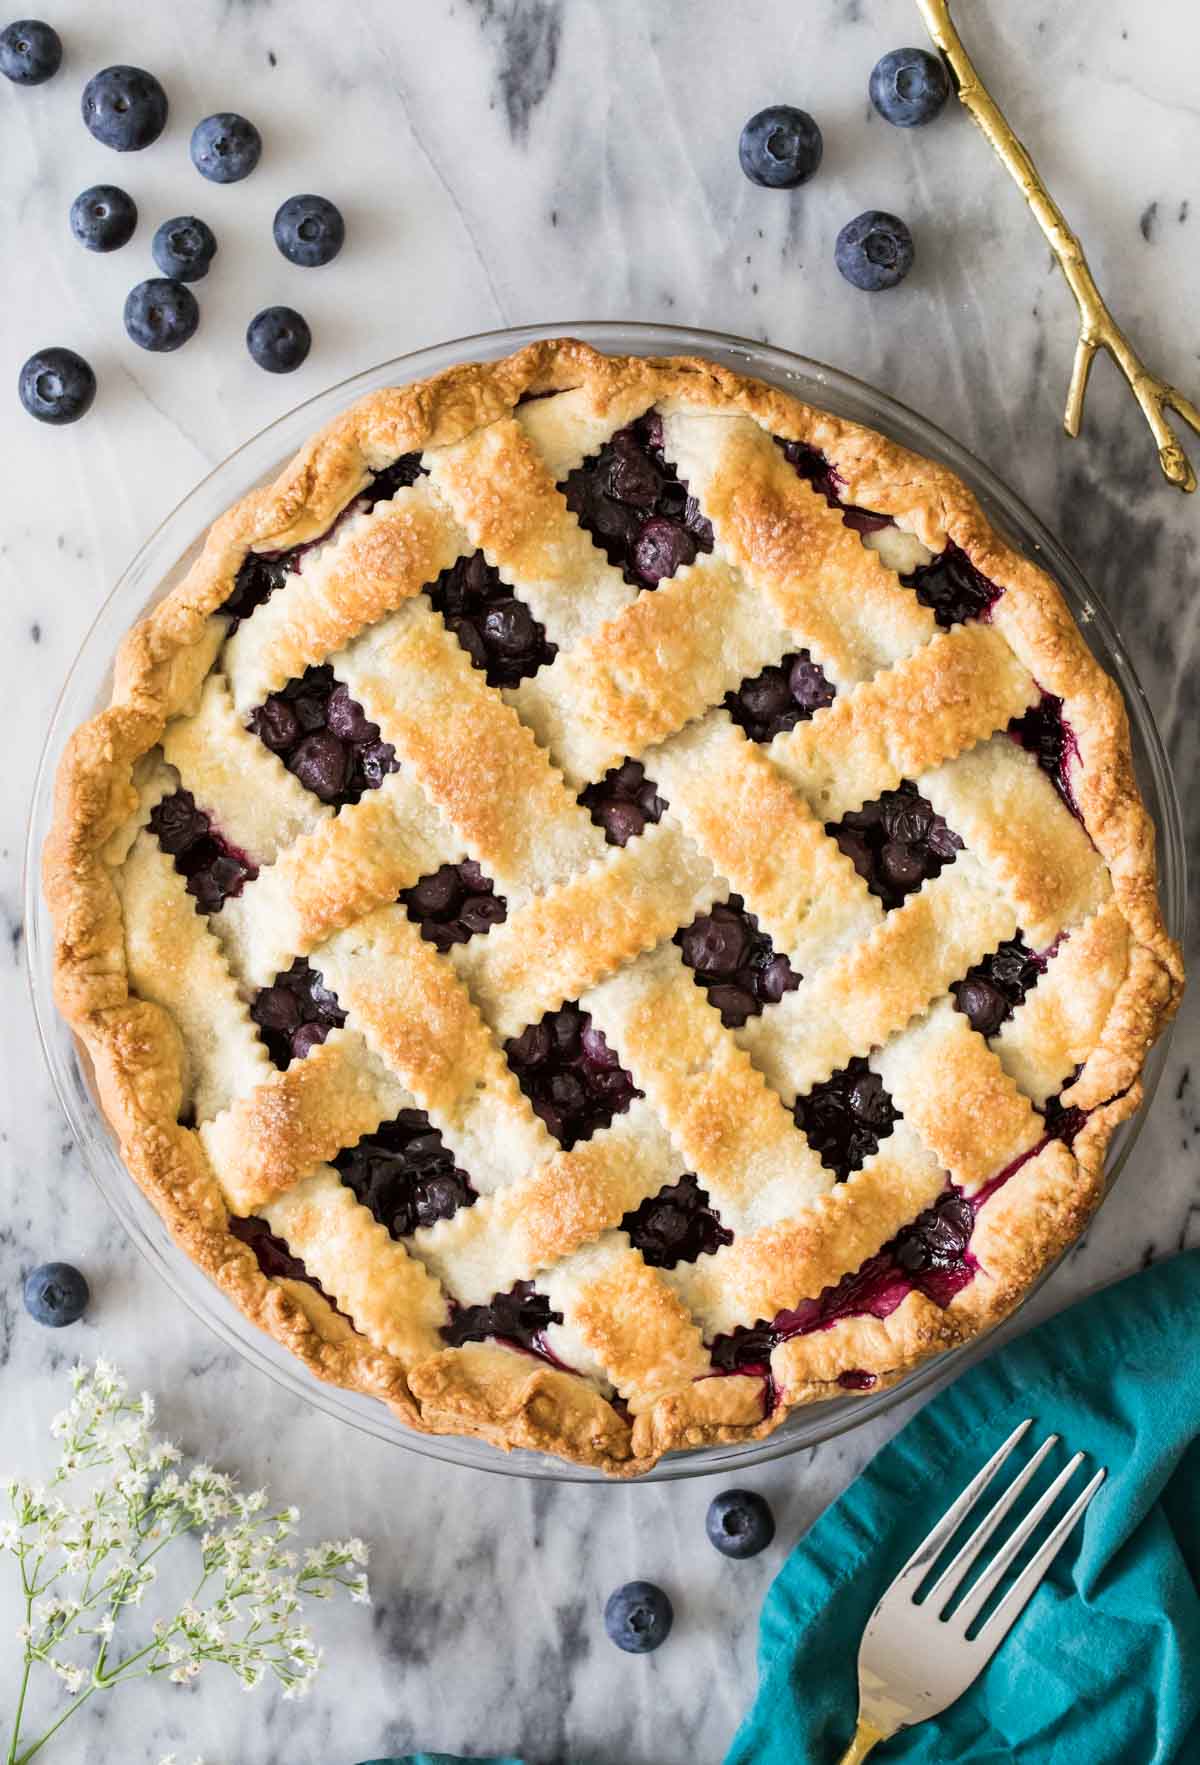 Overhead view of a berry pie with a baked lattice crust.